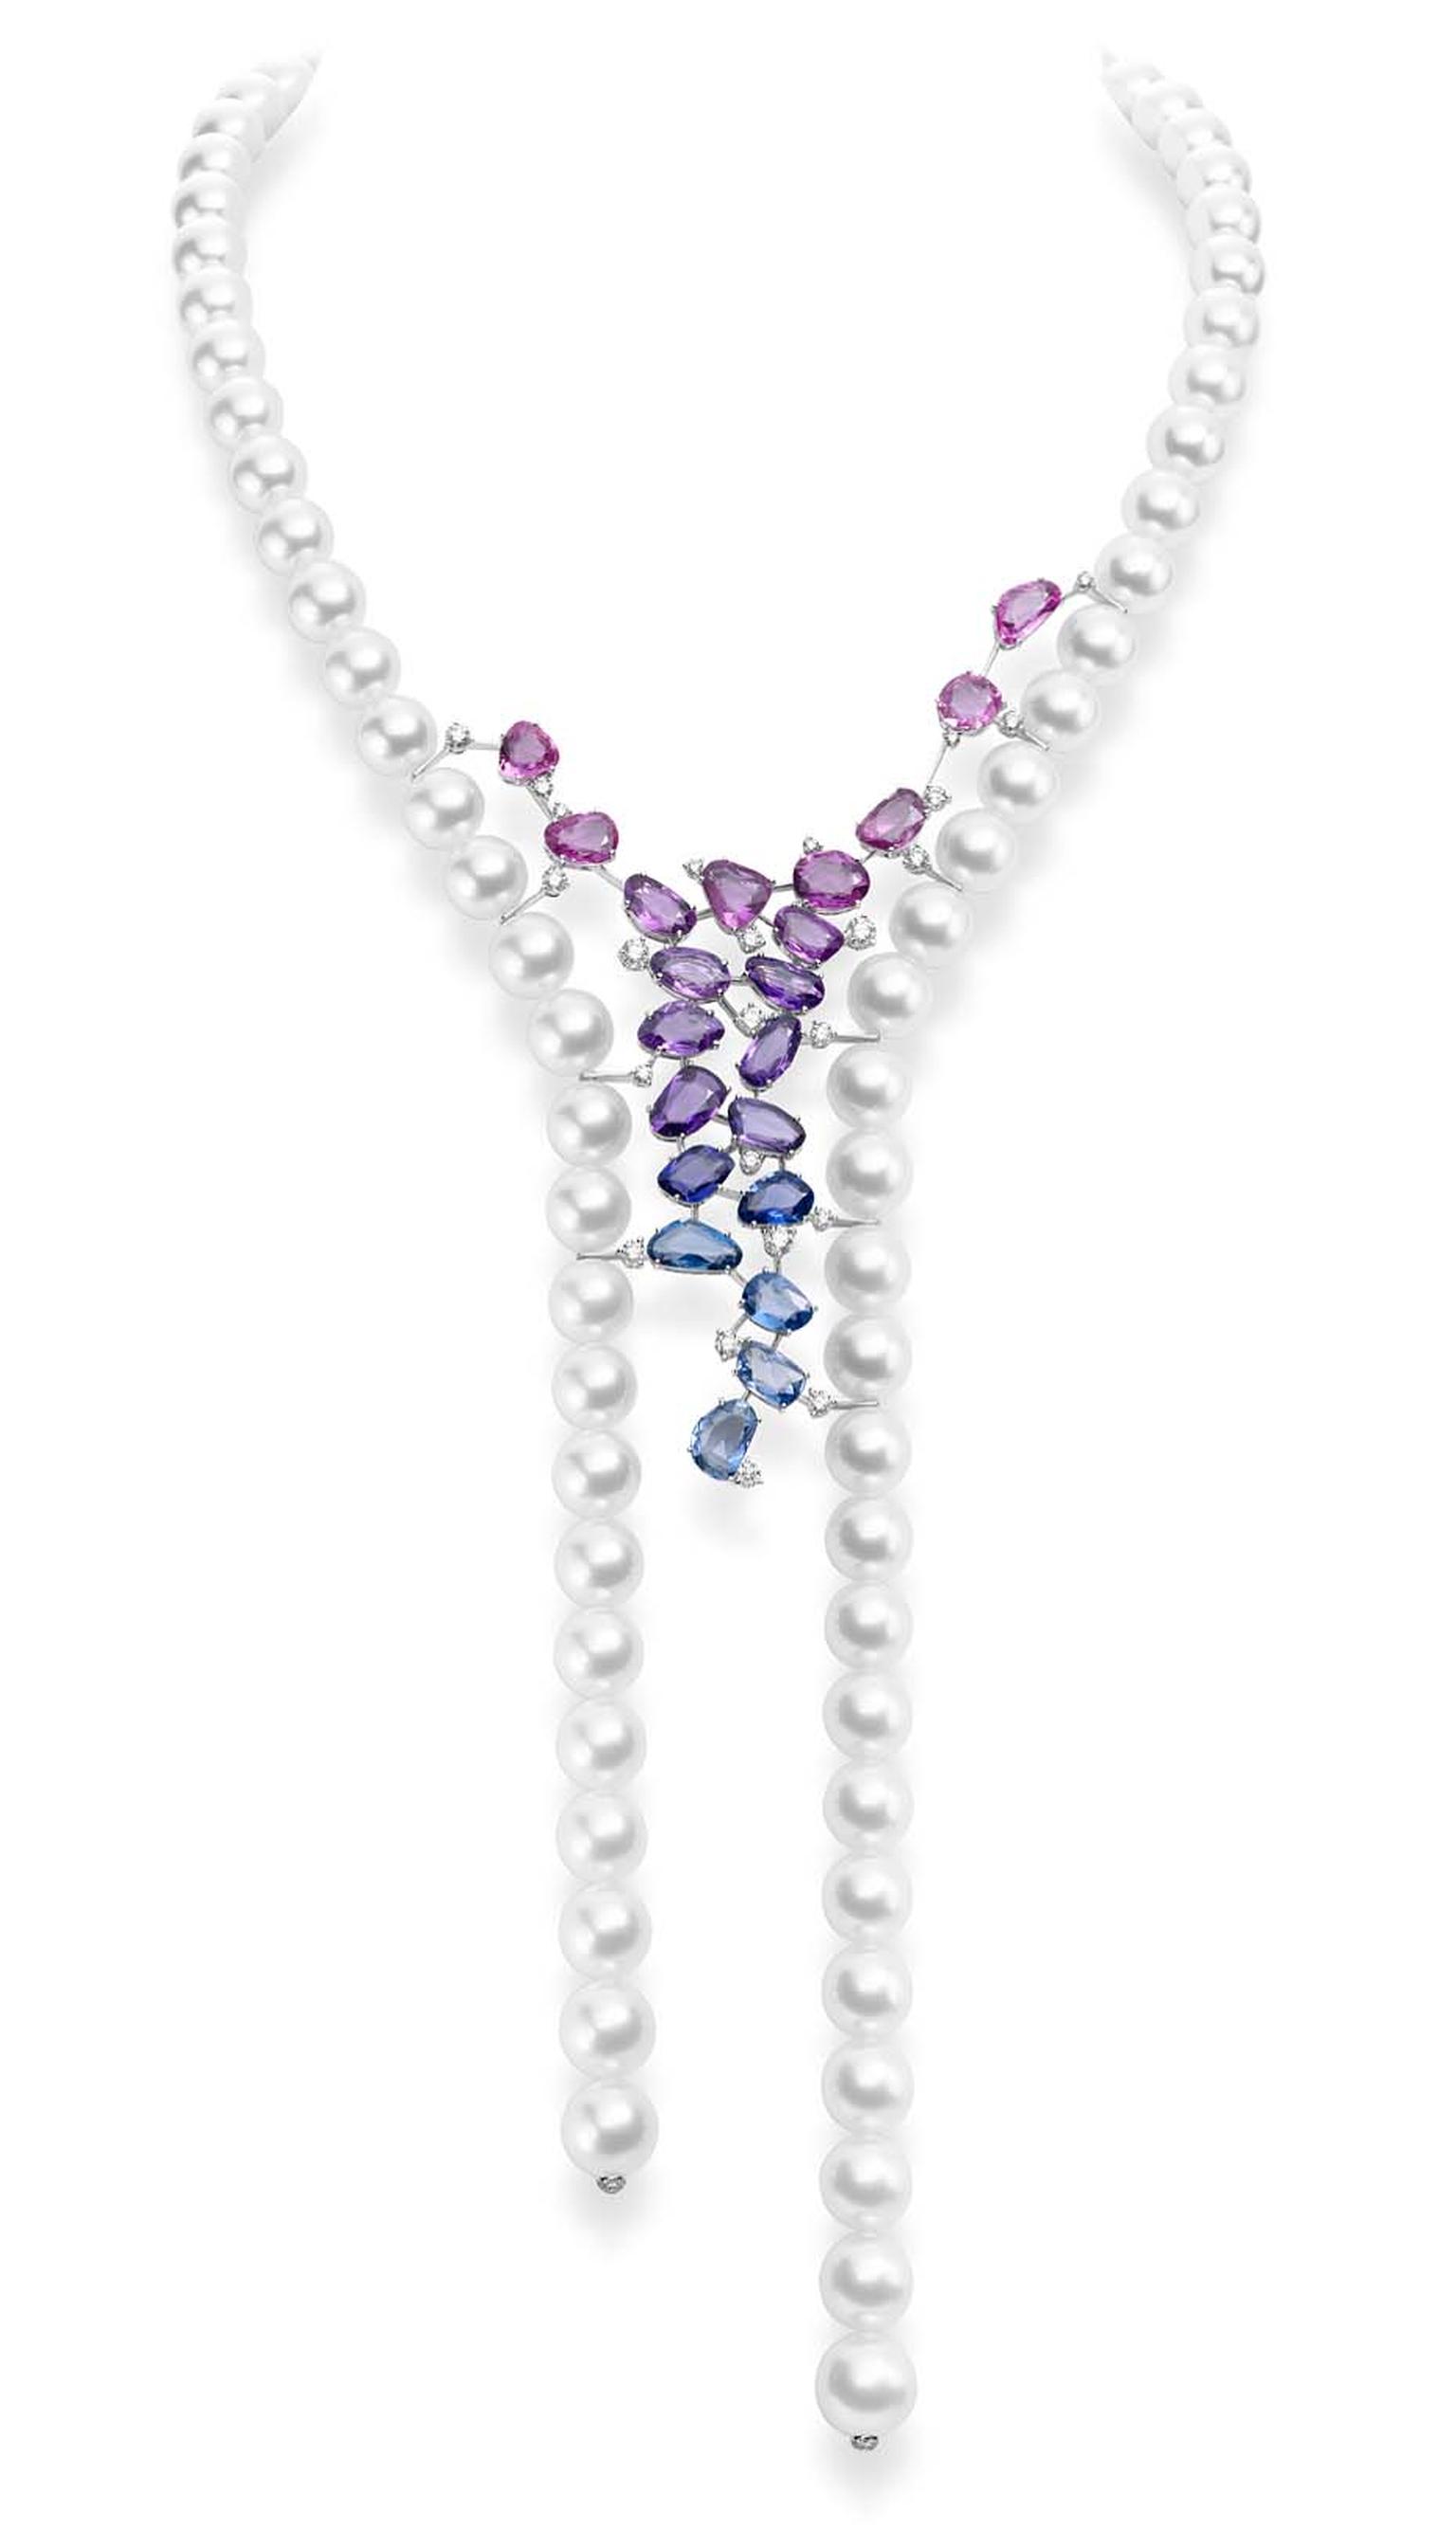 Mikimoto's Sunset necklace features jewels arranged in a unique mosaic of vibrant pink, purple and blue. White cultured South Sea pearls surround a delicate cascade of pink, purple and blue sapphires and diamonds set in white gold.